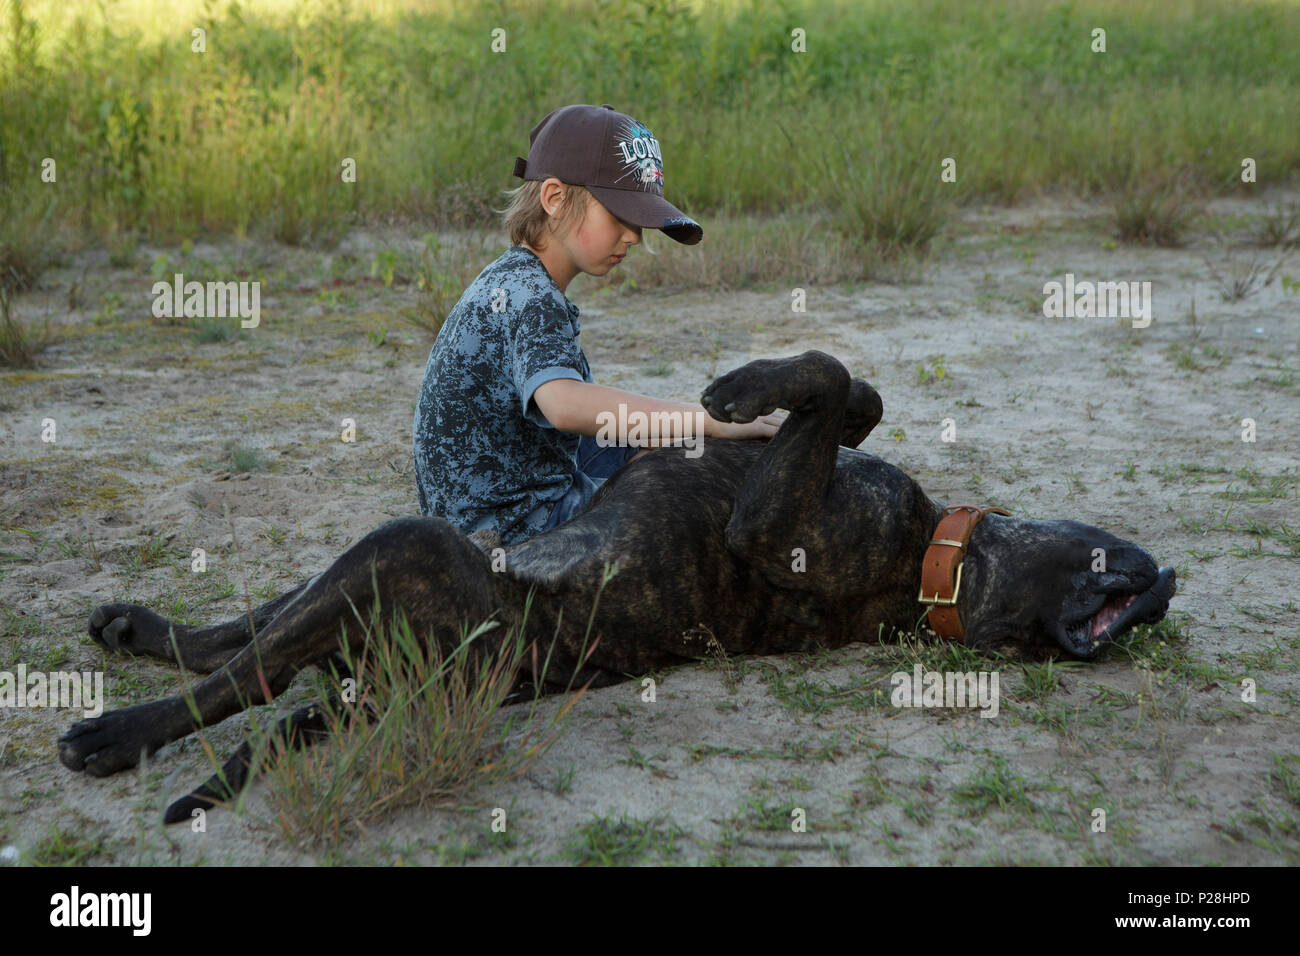 boy playing with big dog on the ground Stock Photo